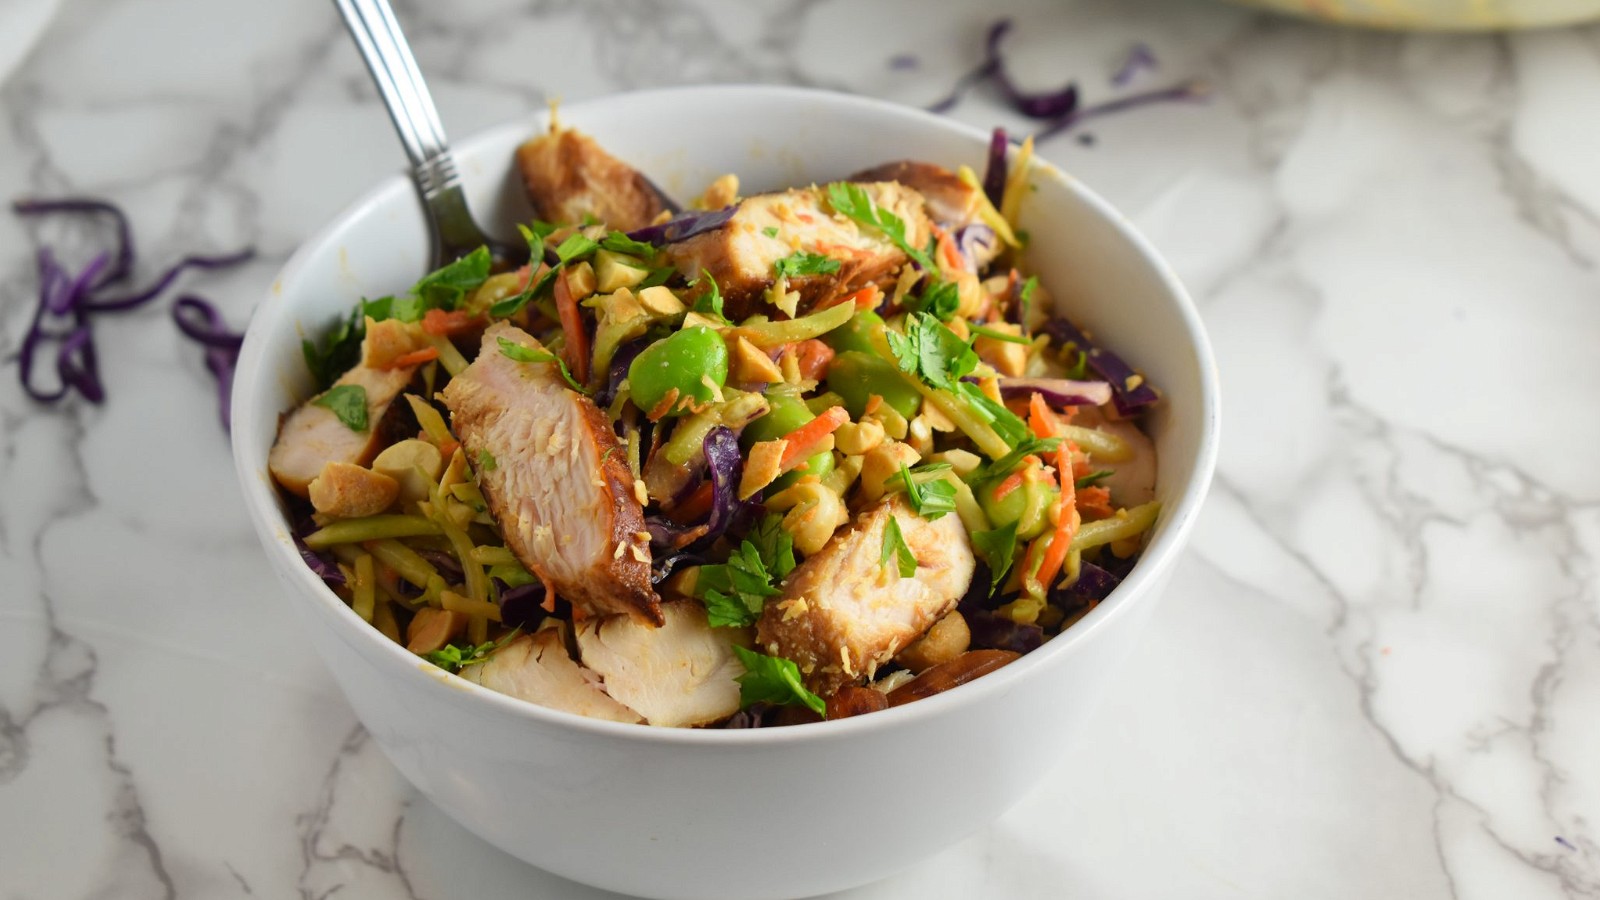 Image of Asian Broccoli Slaw with Chicken